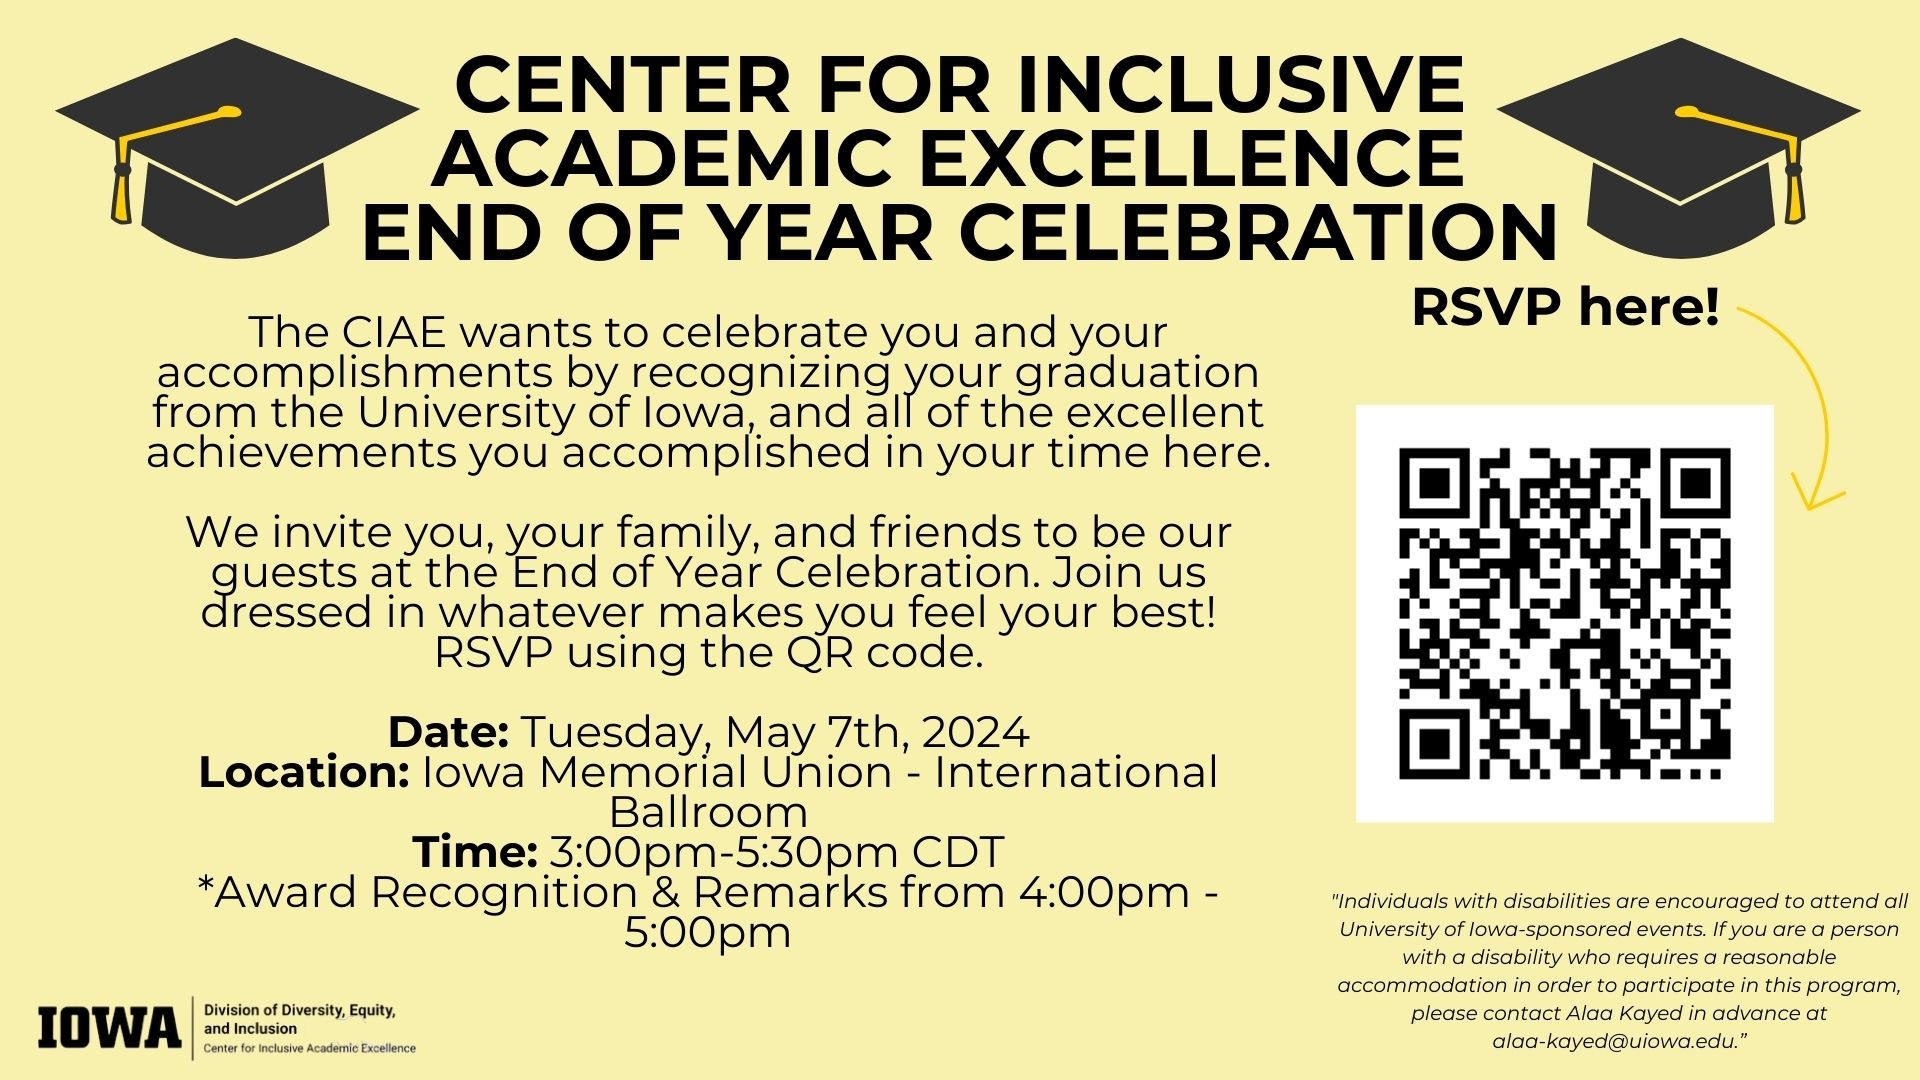 Center for Inclusive Academic Excellence End of Year Celebration on Tuesday, May 7 in the IMU International Ballroom (2nd Floor) from 3:00-5:30pm